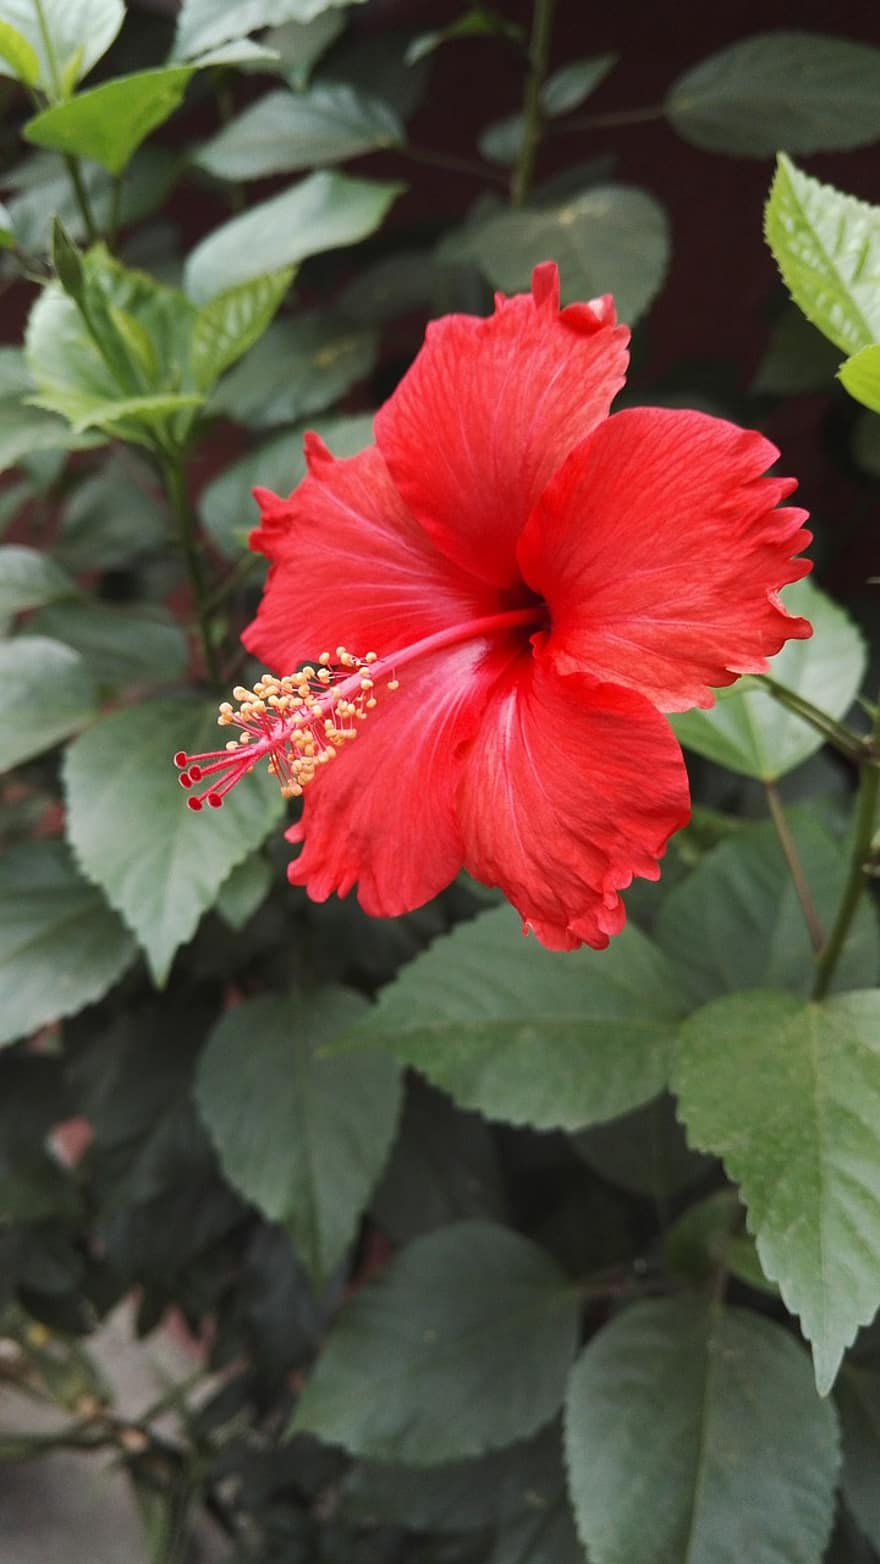 Hibiscus, Flower, Red Hibiscus, Petals, Red Petals, Leaves, Bloom, Blossom, Flora, Plant